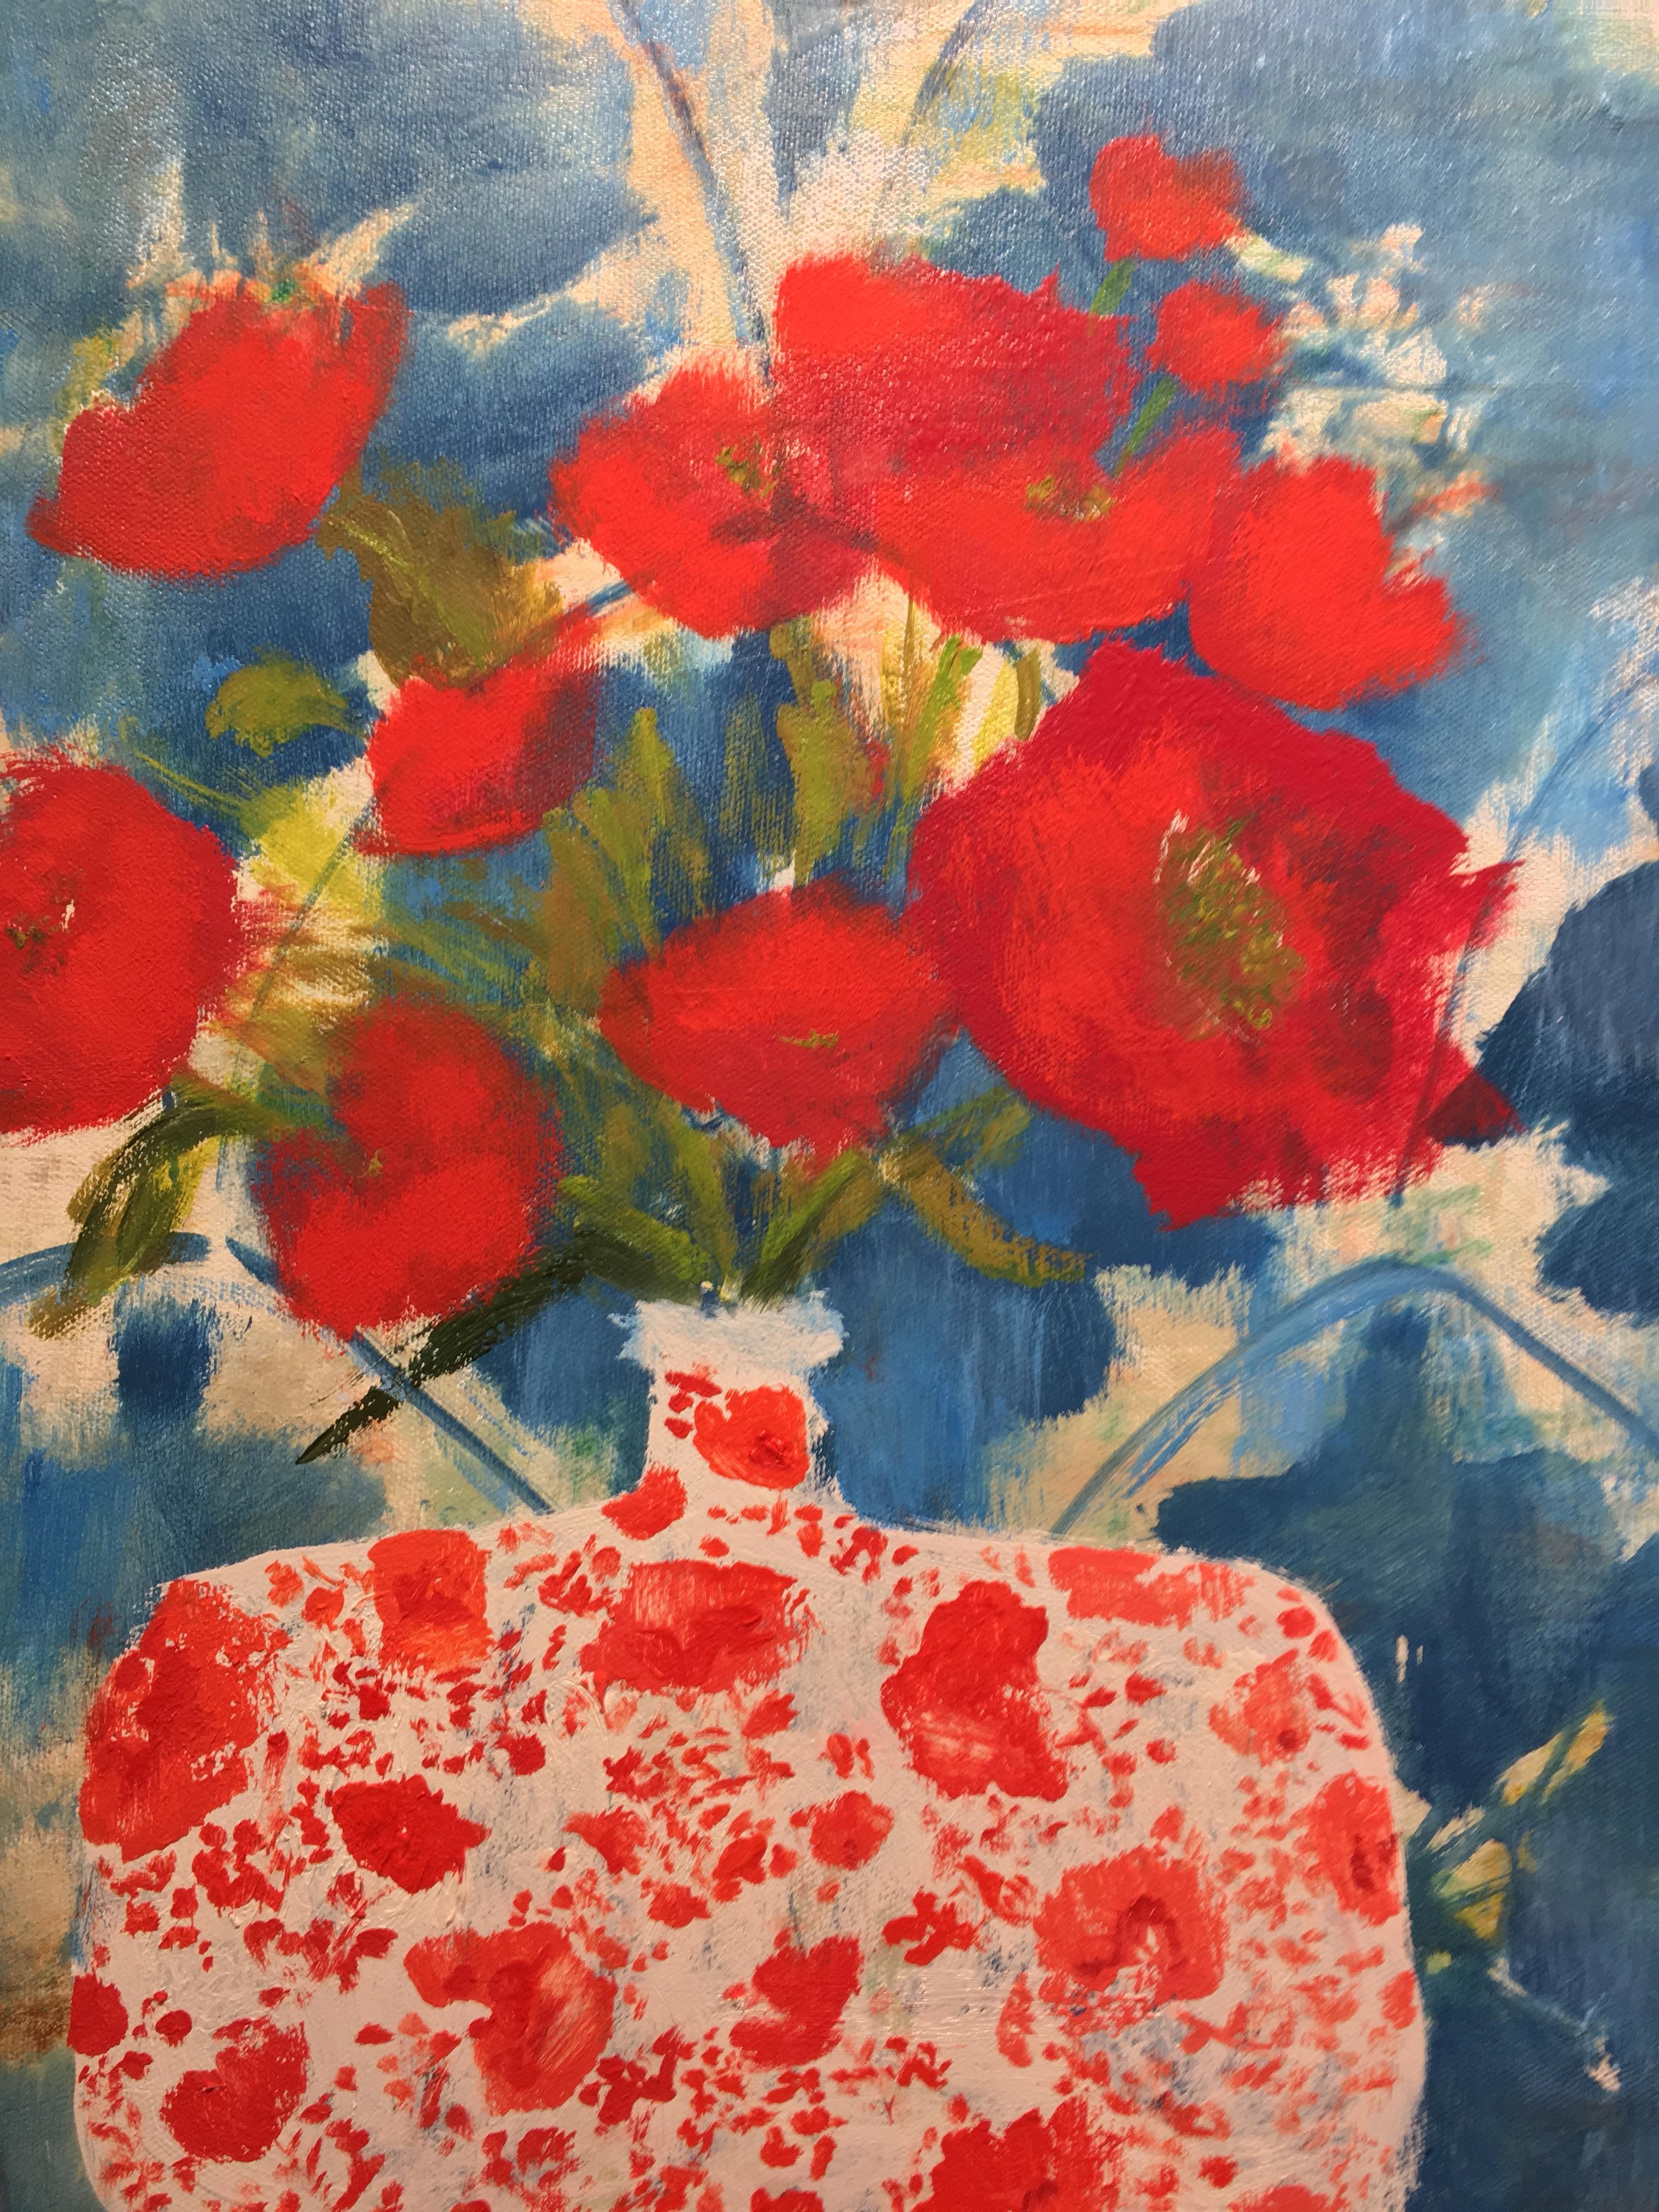 The bright red blossoms with green leaves in the bouquet at the center of this still life painting of flowers arranged in a red and white floral painted vase are beautifully complemented by the blue and white patterned wallpaper in the background.